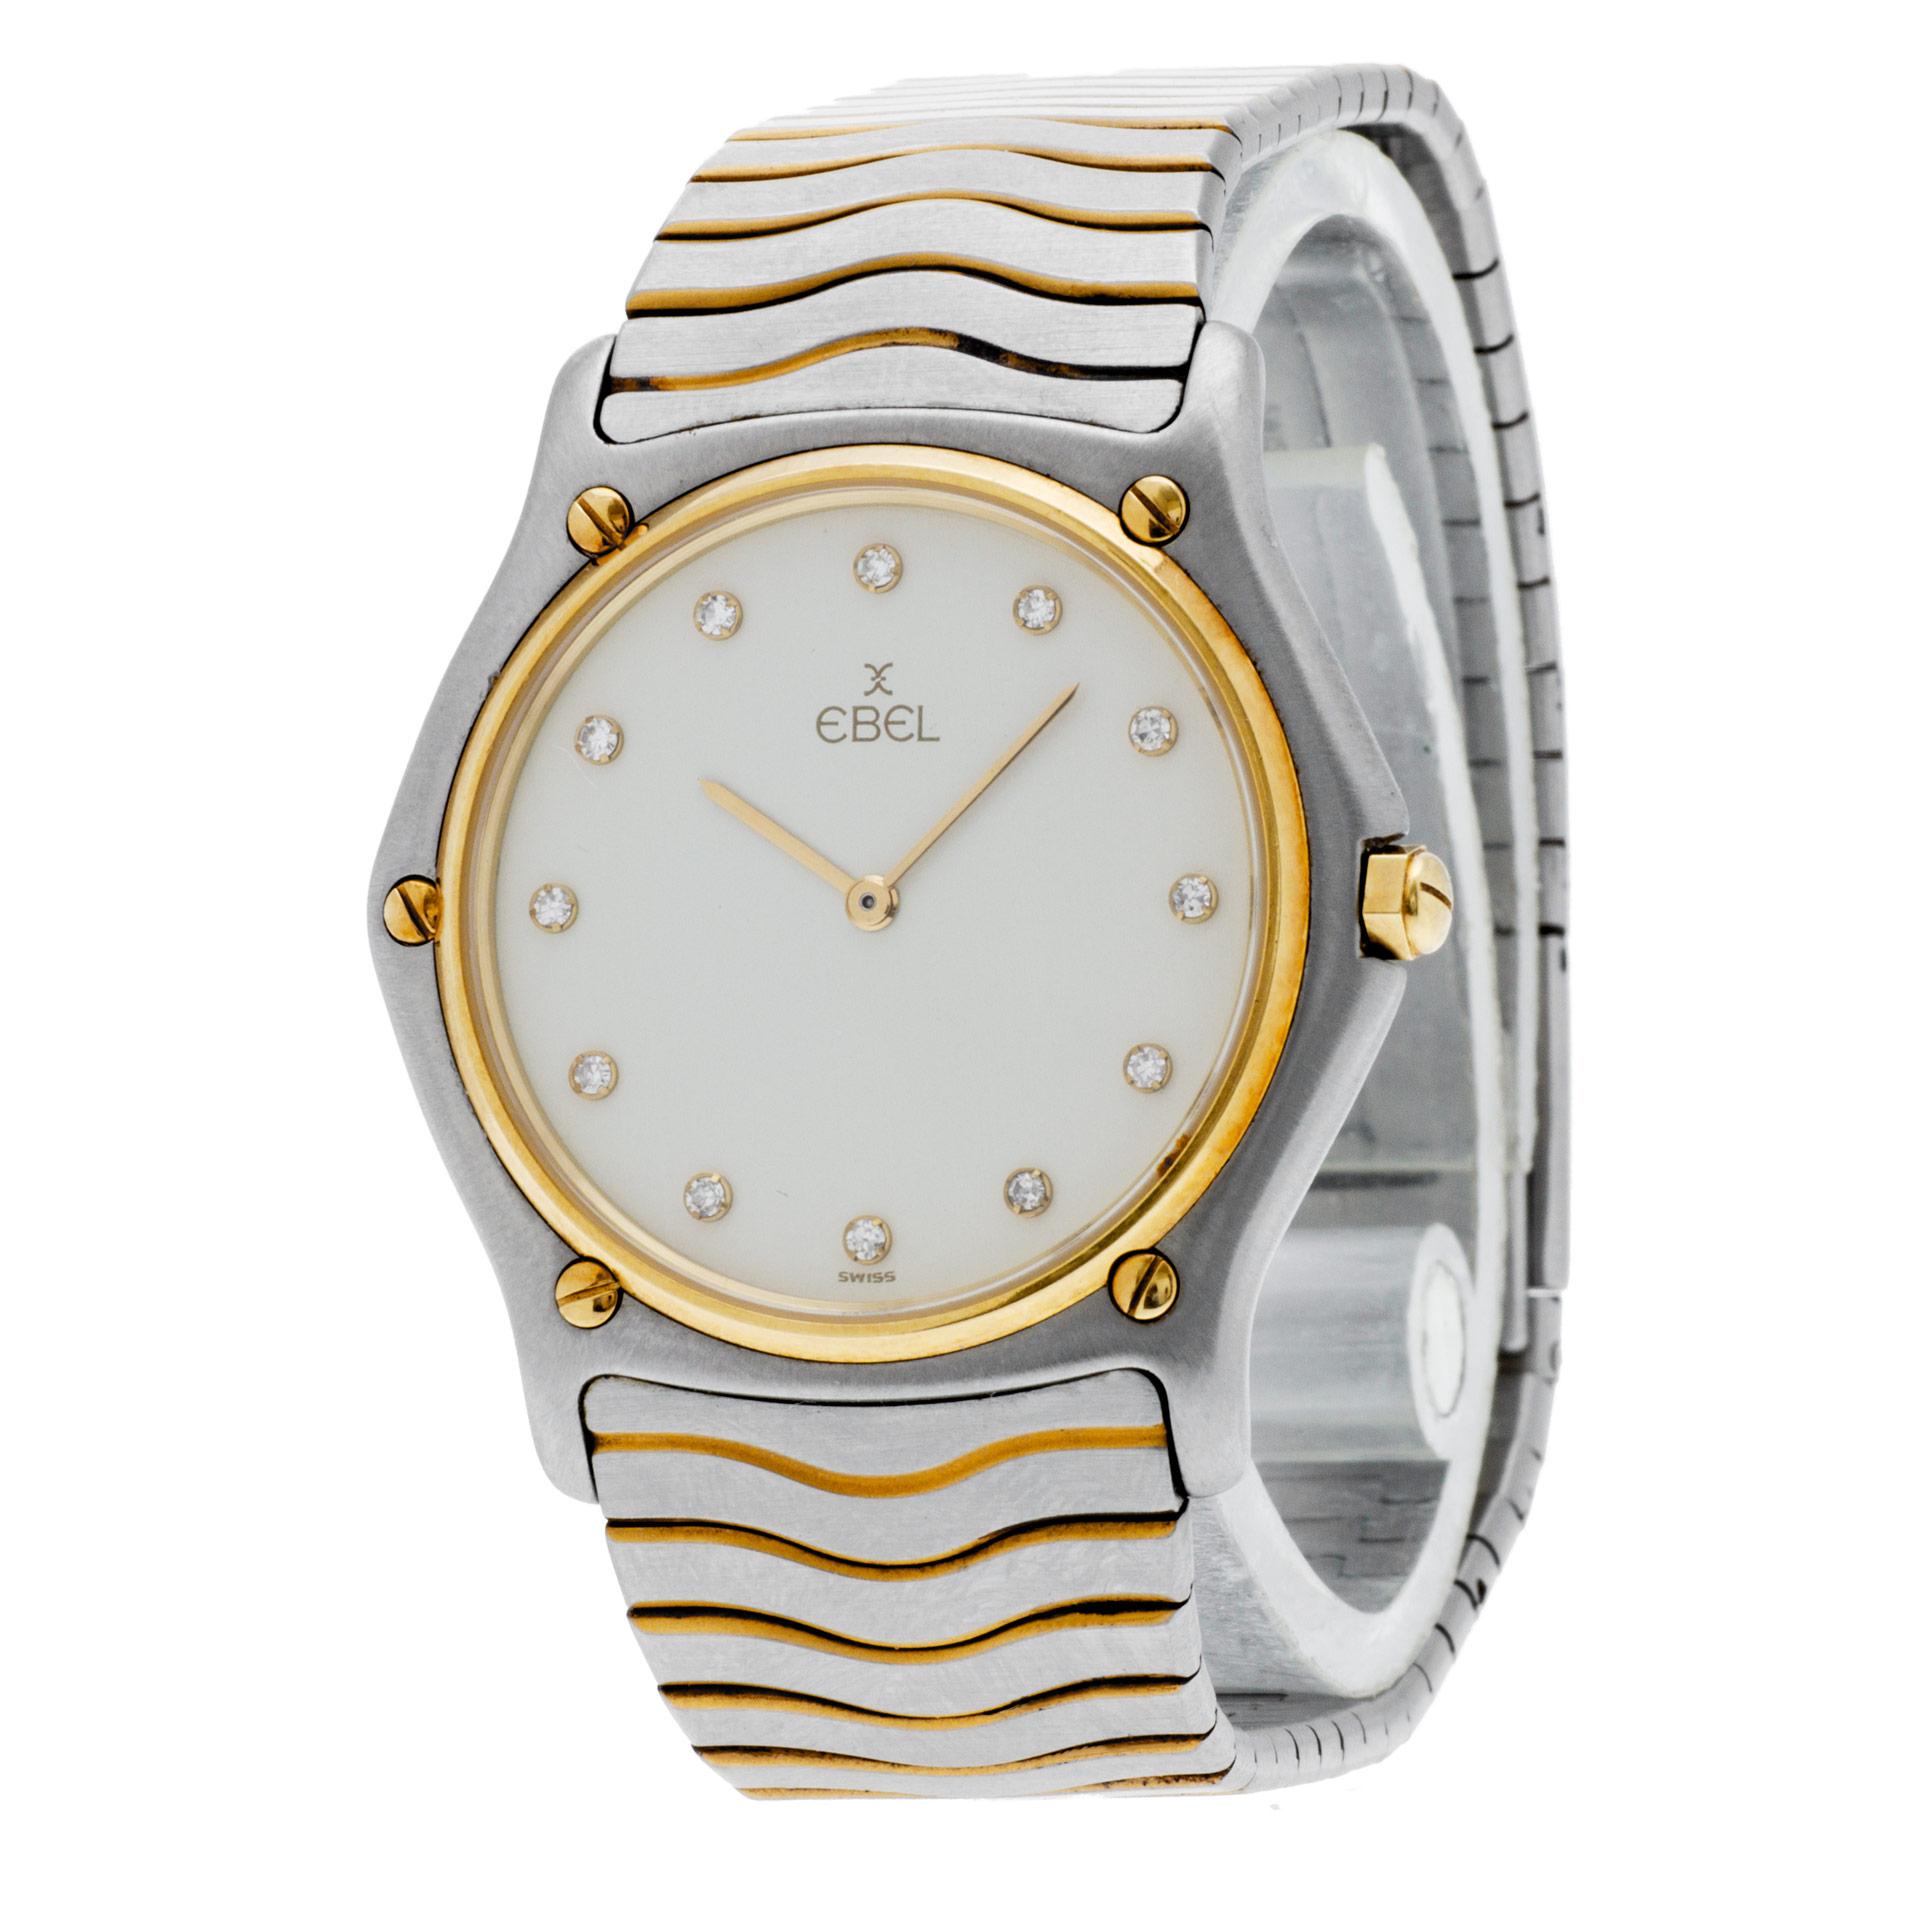 Unisex Ebel Sportwave with diamonds on dial in 18k yellow gold & stainless steel. Quartz. 34 mm case size. Ref 181903. Fine Pre-owned Ebel Watch. Certified preowned Ebel Sportwave 181903 watch is made out of Stainless steel on a 18k & Stainless